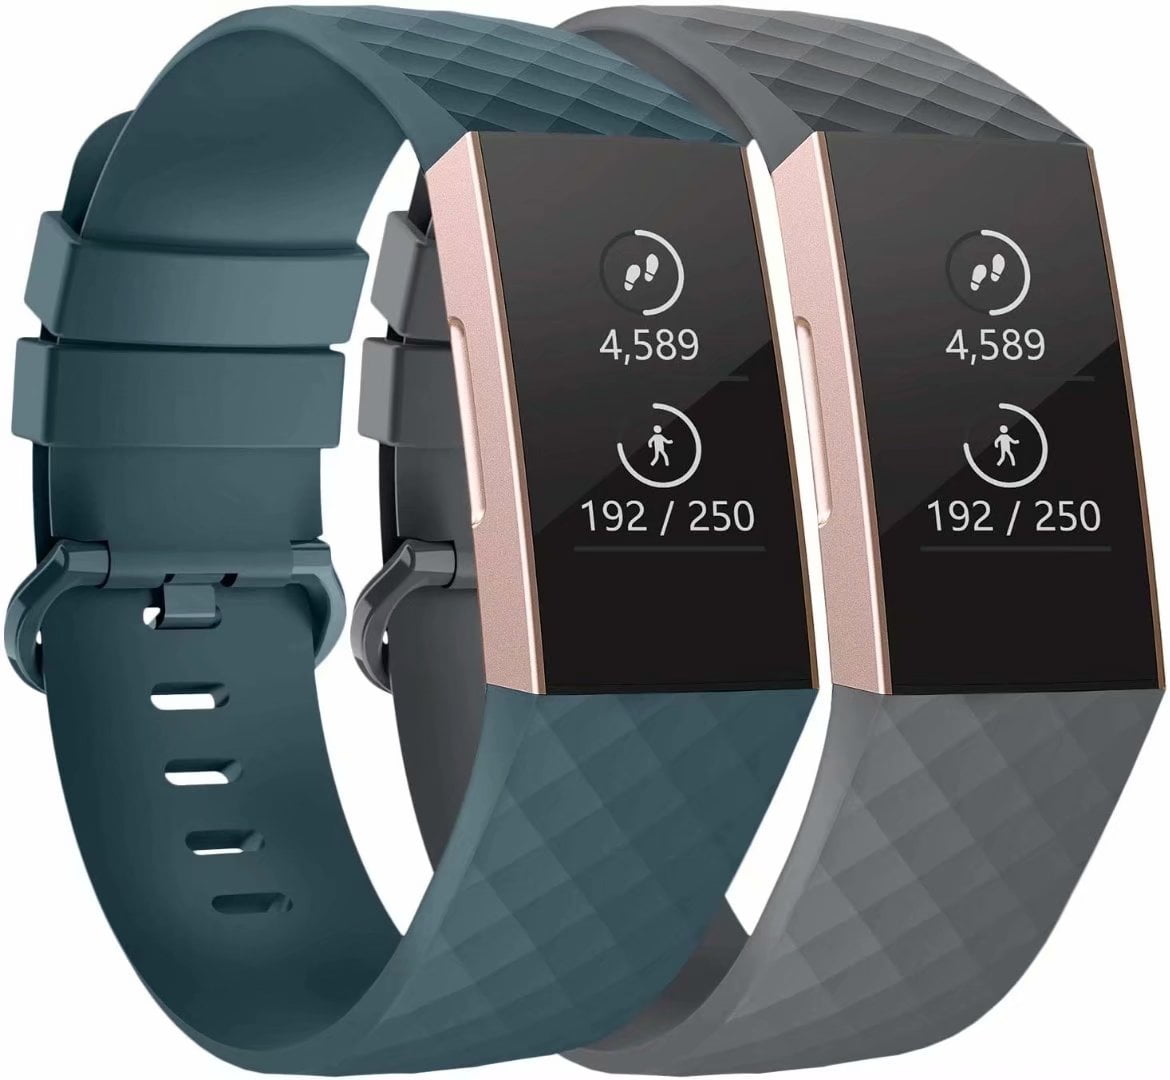 2x Soft TPU Band Wistband Strap For Fitbit Charge 4 & 3 Replacement Black+Pink 